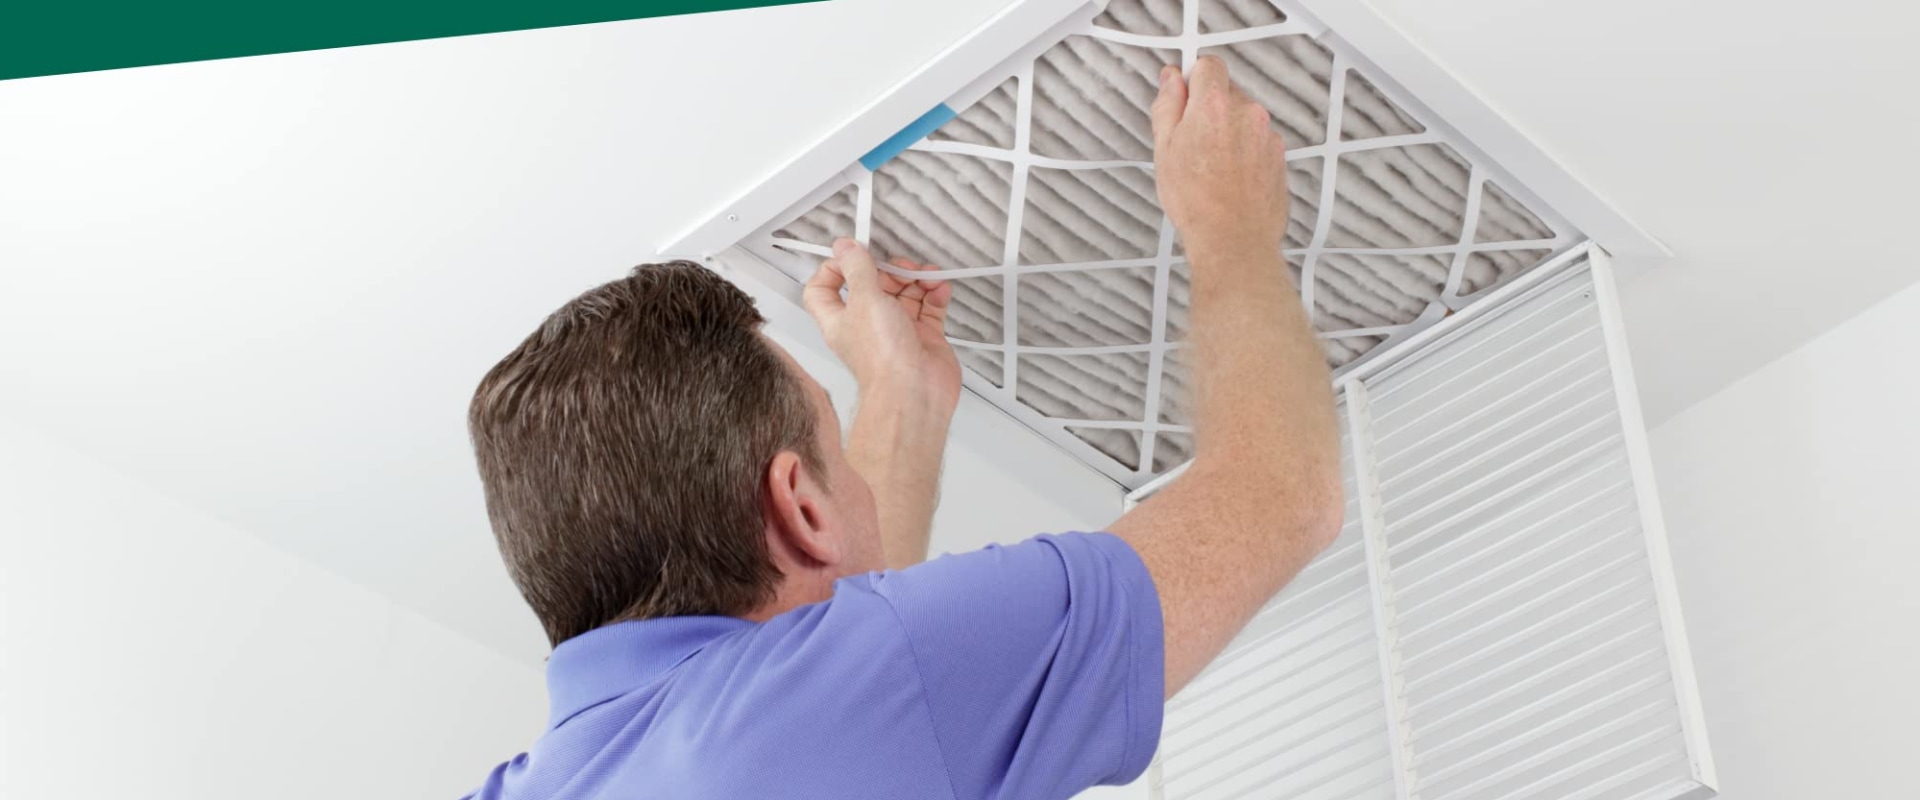 HVAC Services Recommends the Best 20x24x1 AC Furnace Home Air Filters for Your System